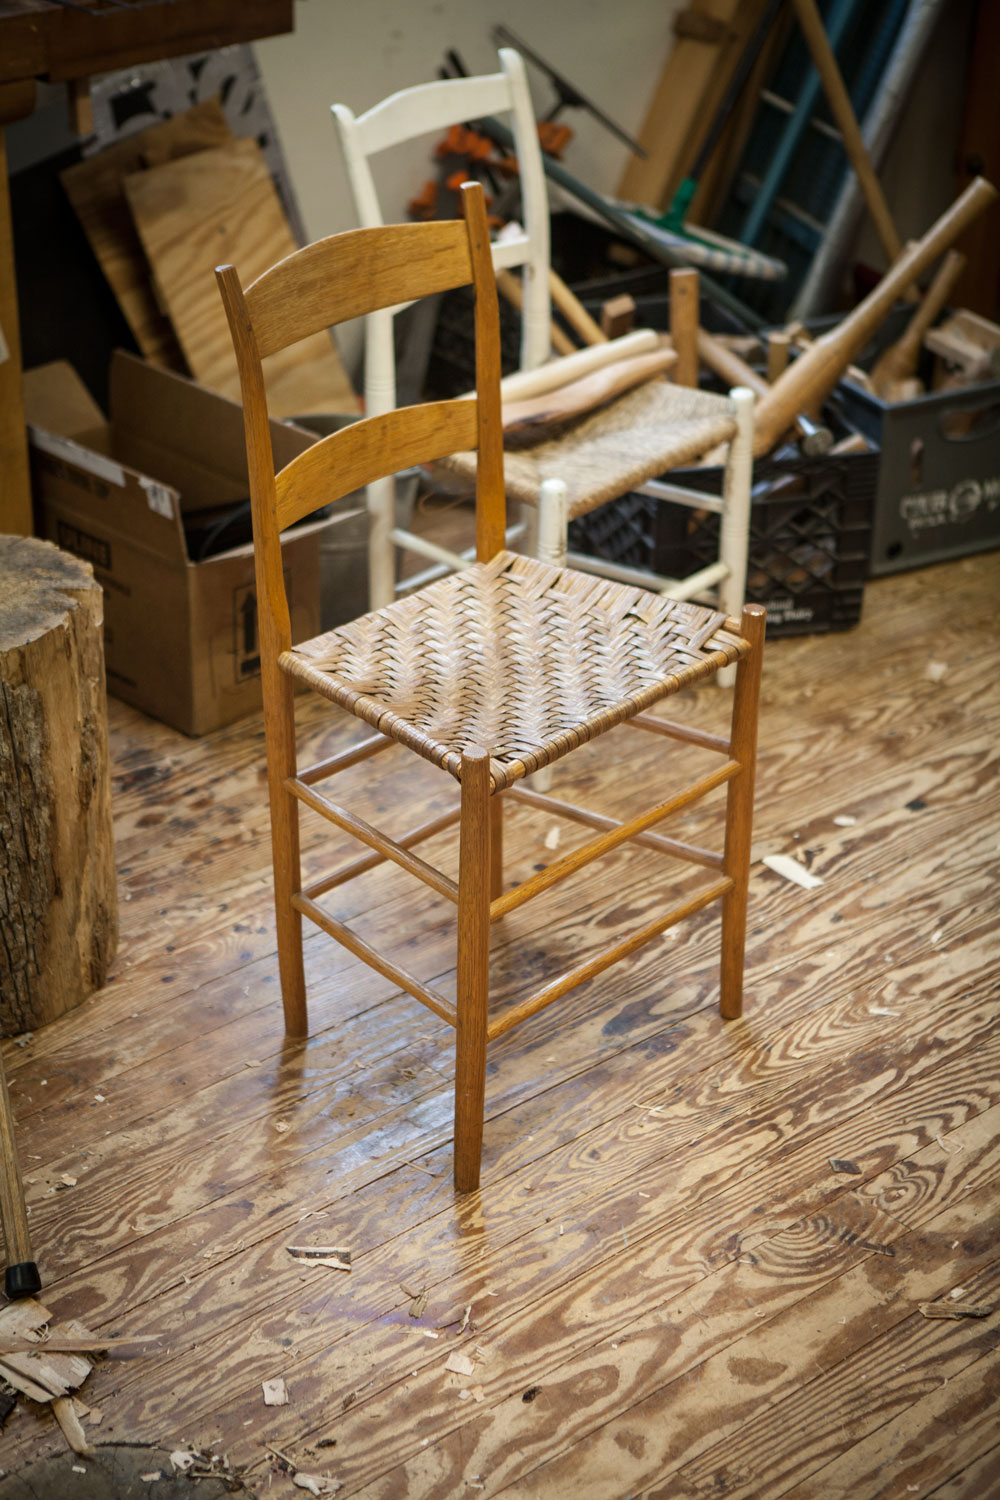 A chair made by Jennie Alexander, author of "Make a Chair from a Tree."